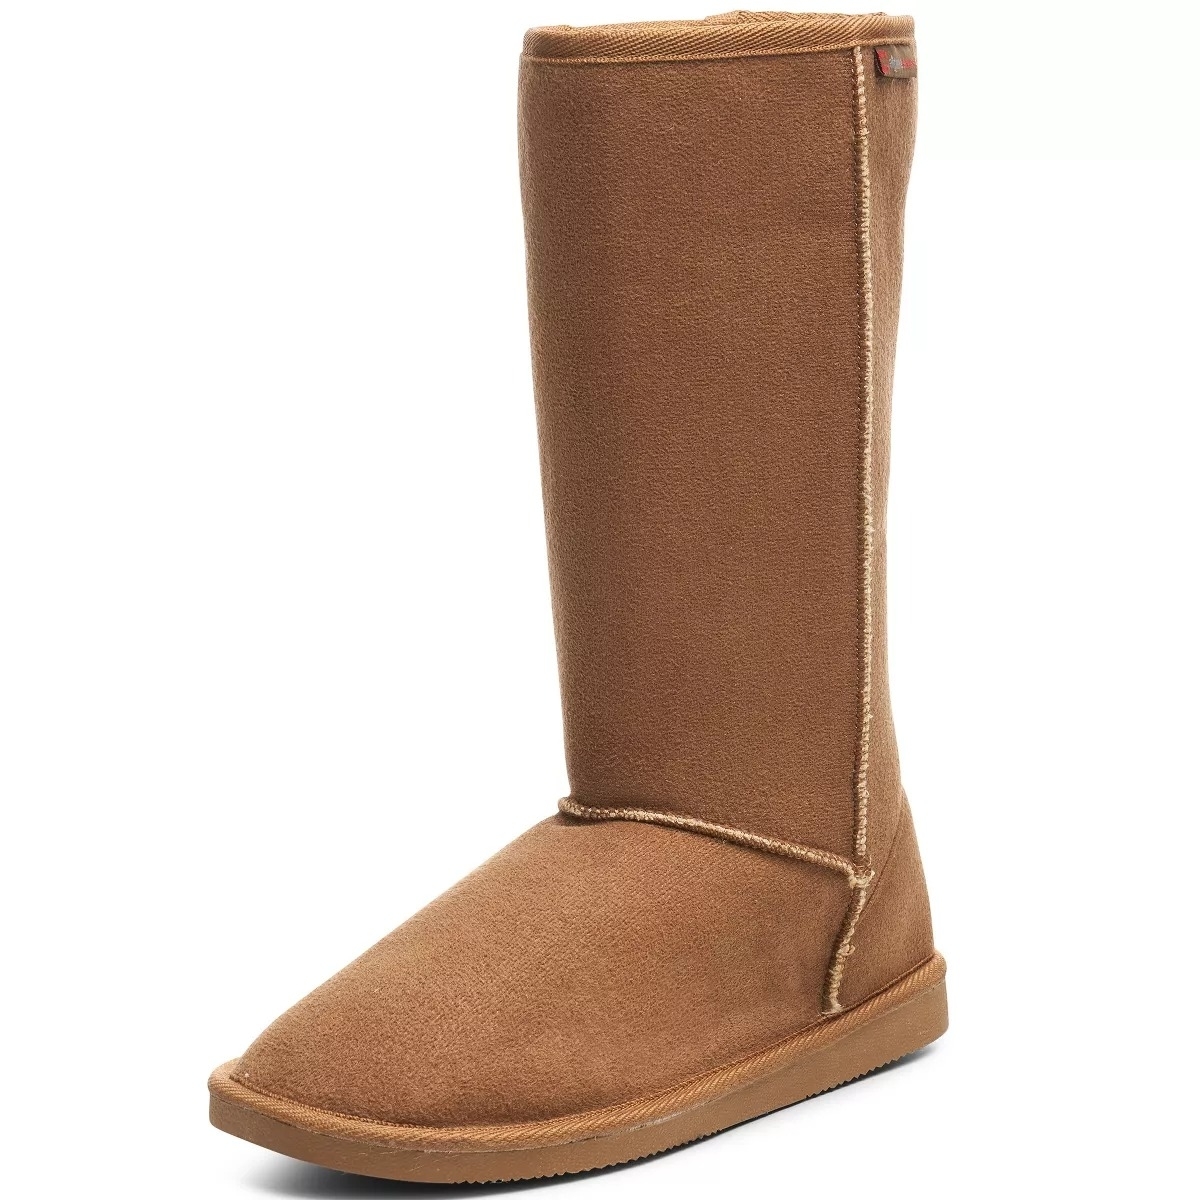 chestnut tall boots with shearling lining